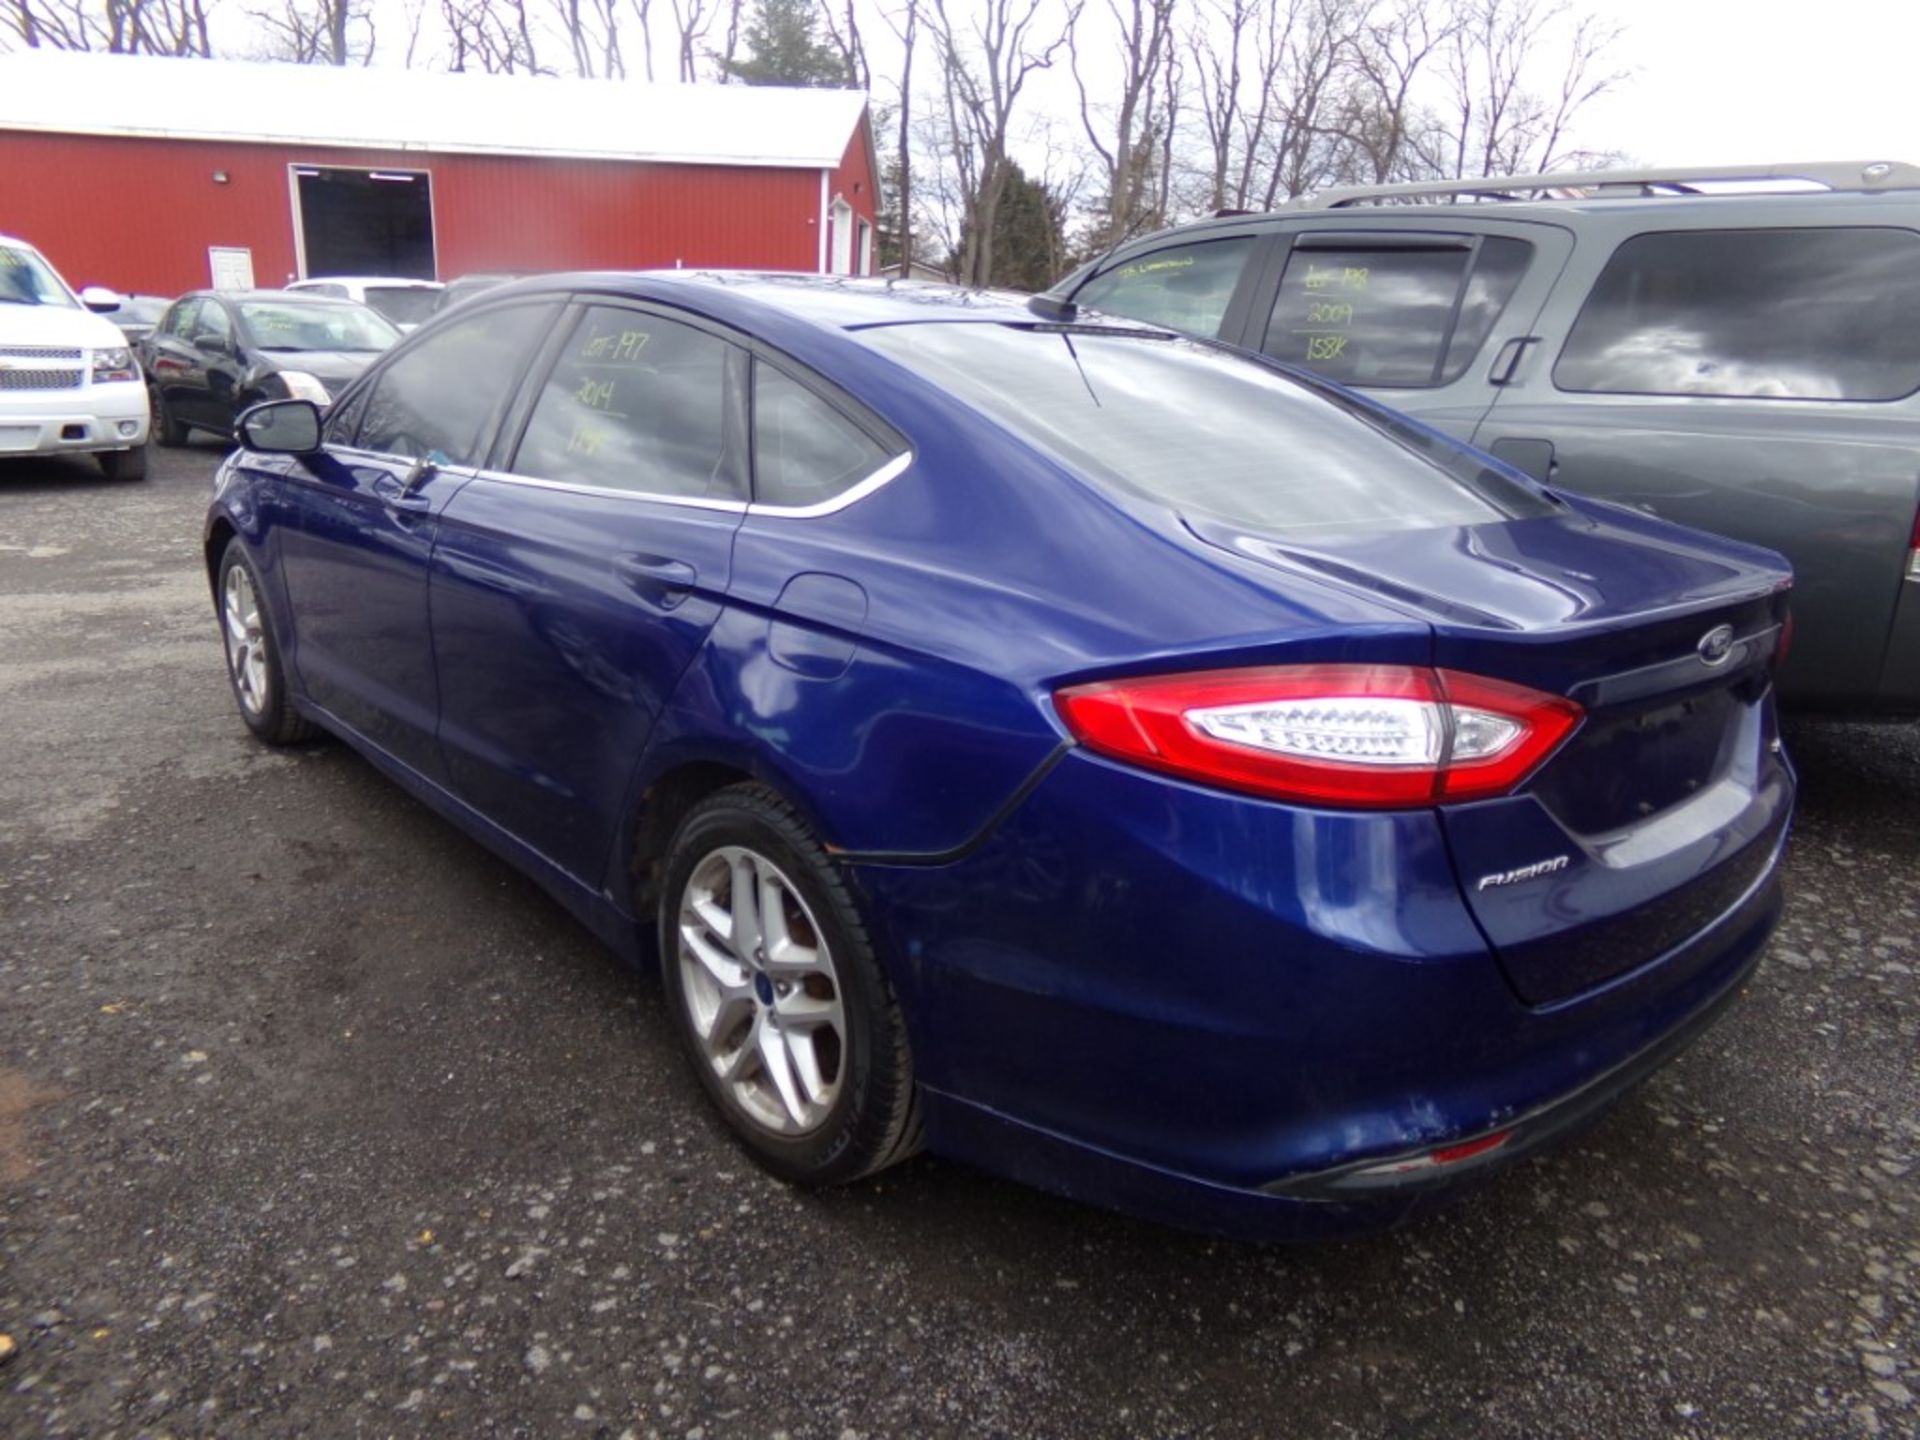 2014 Ford Fusion SE, Blue, 174,739 Miles, VIN#1FA6P0H7XE5365423, AIR BAG LIGHT IS ON, MINOR DAMAGE - Image 4 of 18